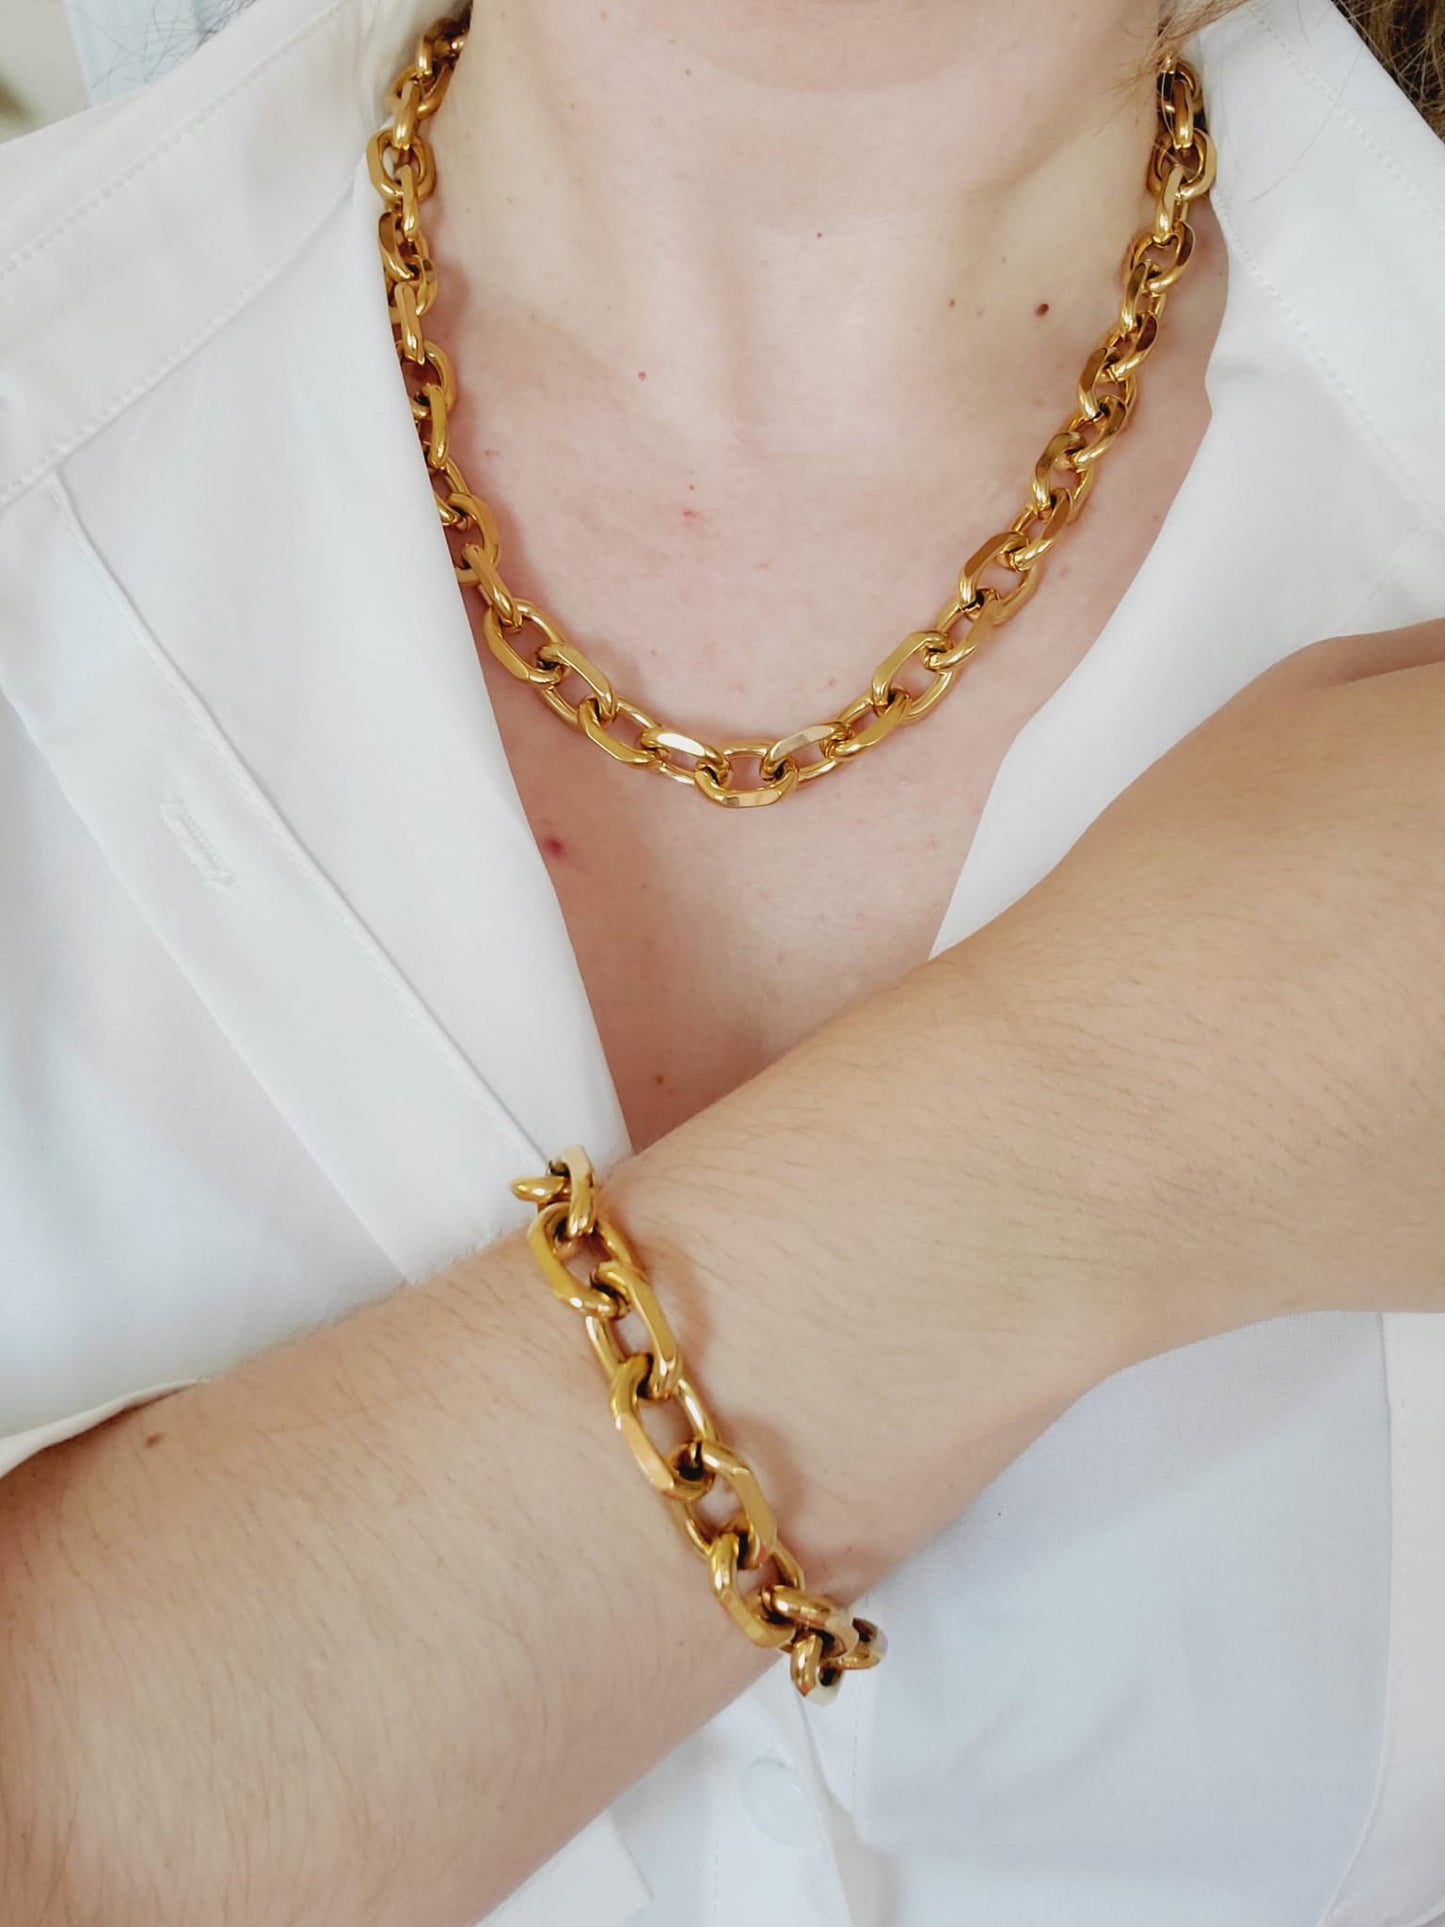 Minimalist chain, Gold filled Chain, Flat Gold Necklace, Snake Chain, Water resistant jewelry, water resistant Necklace, Water resistant bracelet, vintage jewelry, vintage jewelry, vintage necklace, 14k gold necklace, 14k gold jewelry, 14k gold necklace, fine jewelry, fine necklace, fine bracelet, snake gold necklace, bold necklace, bold jewelry, handmade jewelry,